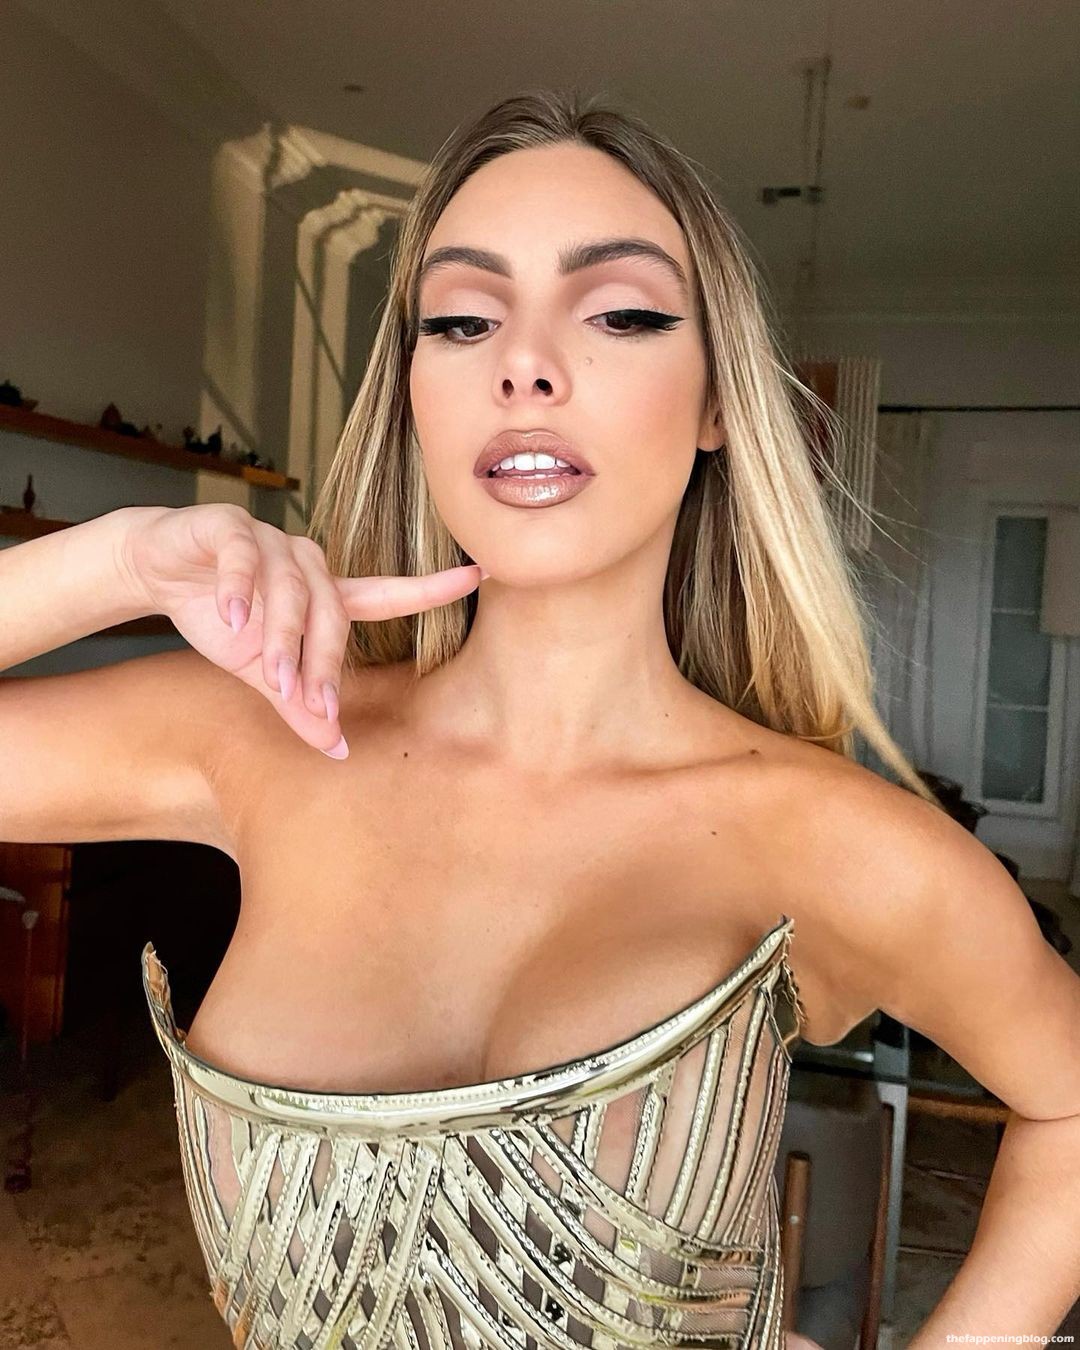 Lele Pons Flaunts Her Boobs in a See-Through Dress (17 Photos + Videos)